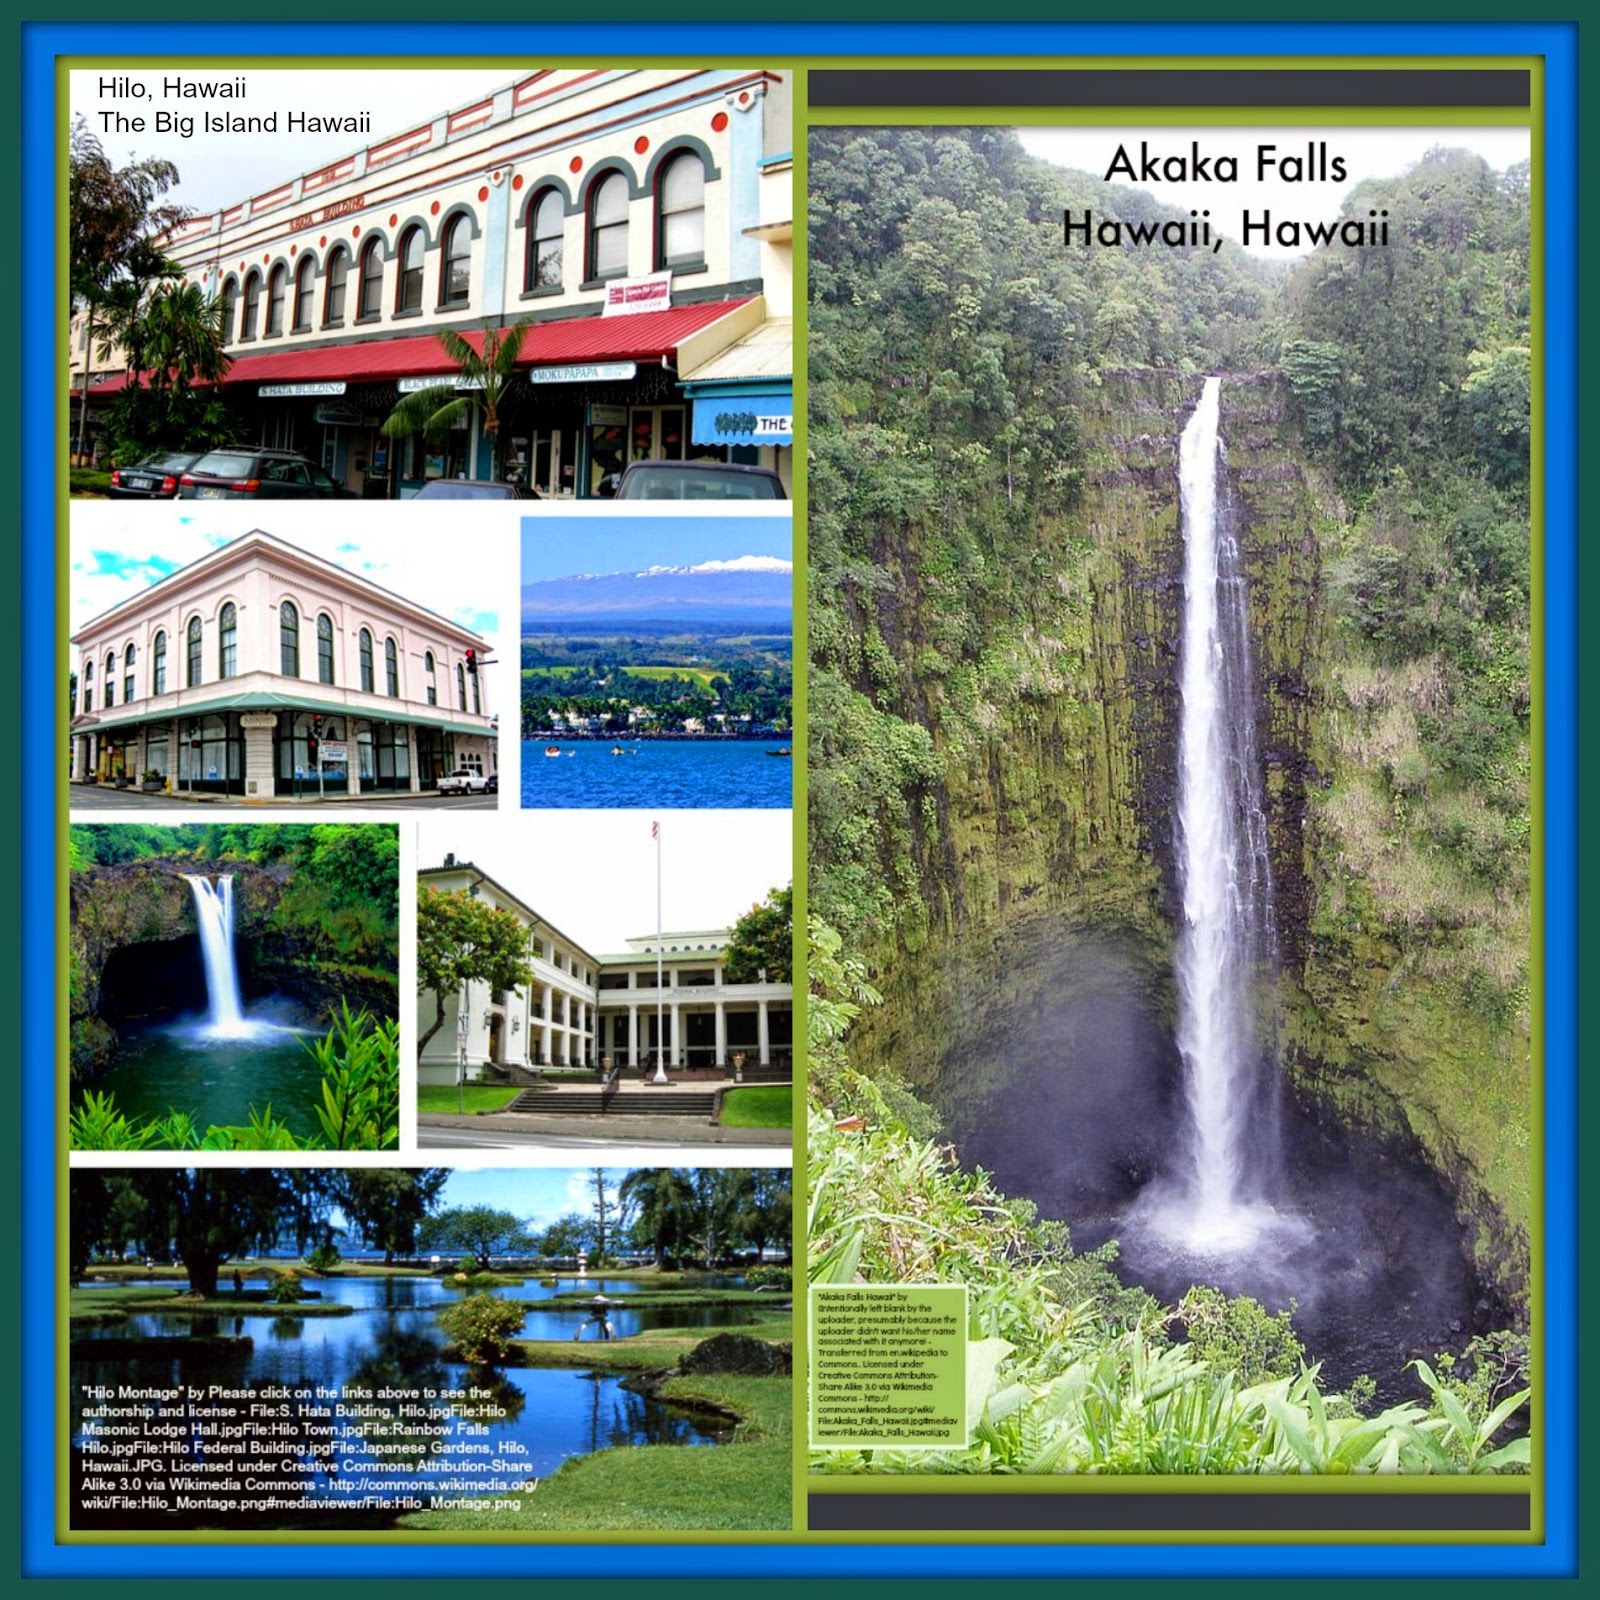 Albums 103+ Background Images Pictures Of Hilo Hawaii Excellent